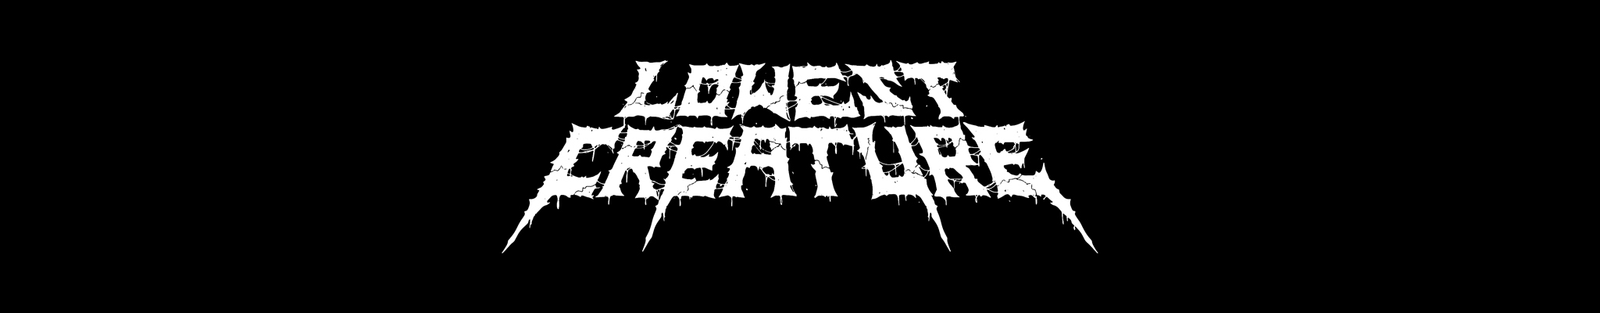 LOWEST CREATURE - Evil Greed